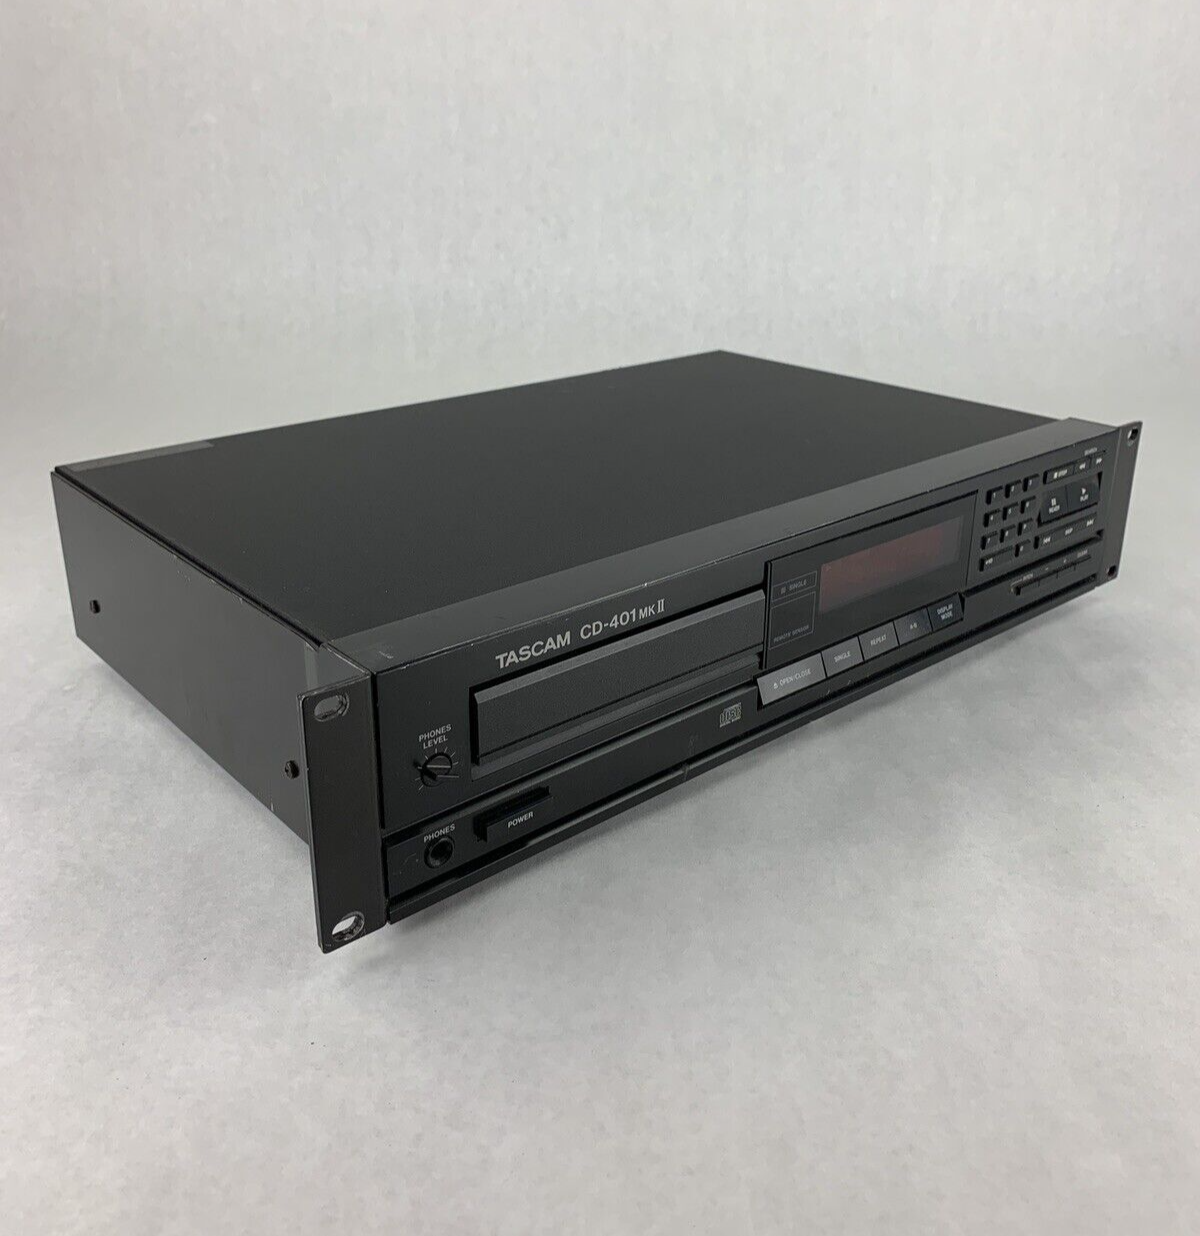 Tascam CD-401 mkII Professional CD Player Broken CD Tray For Parts and Repair